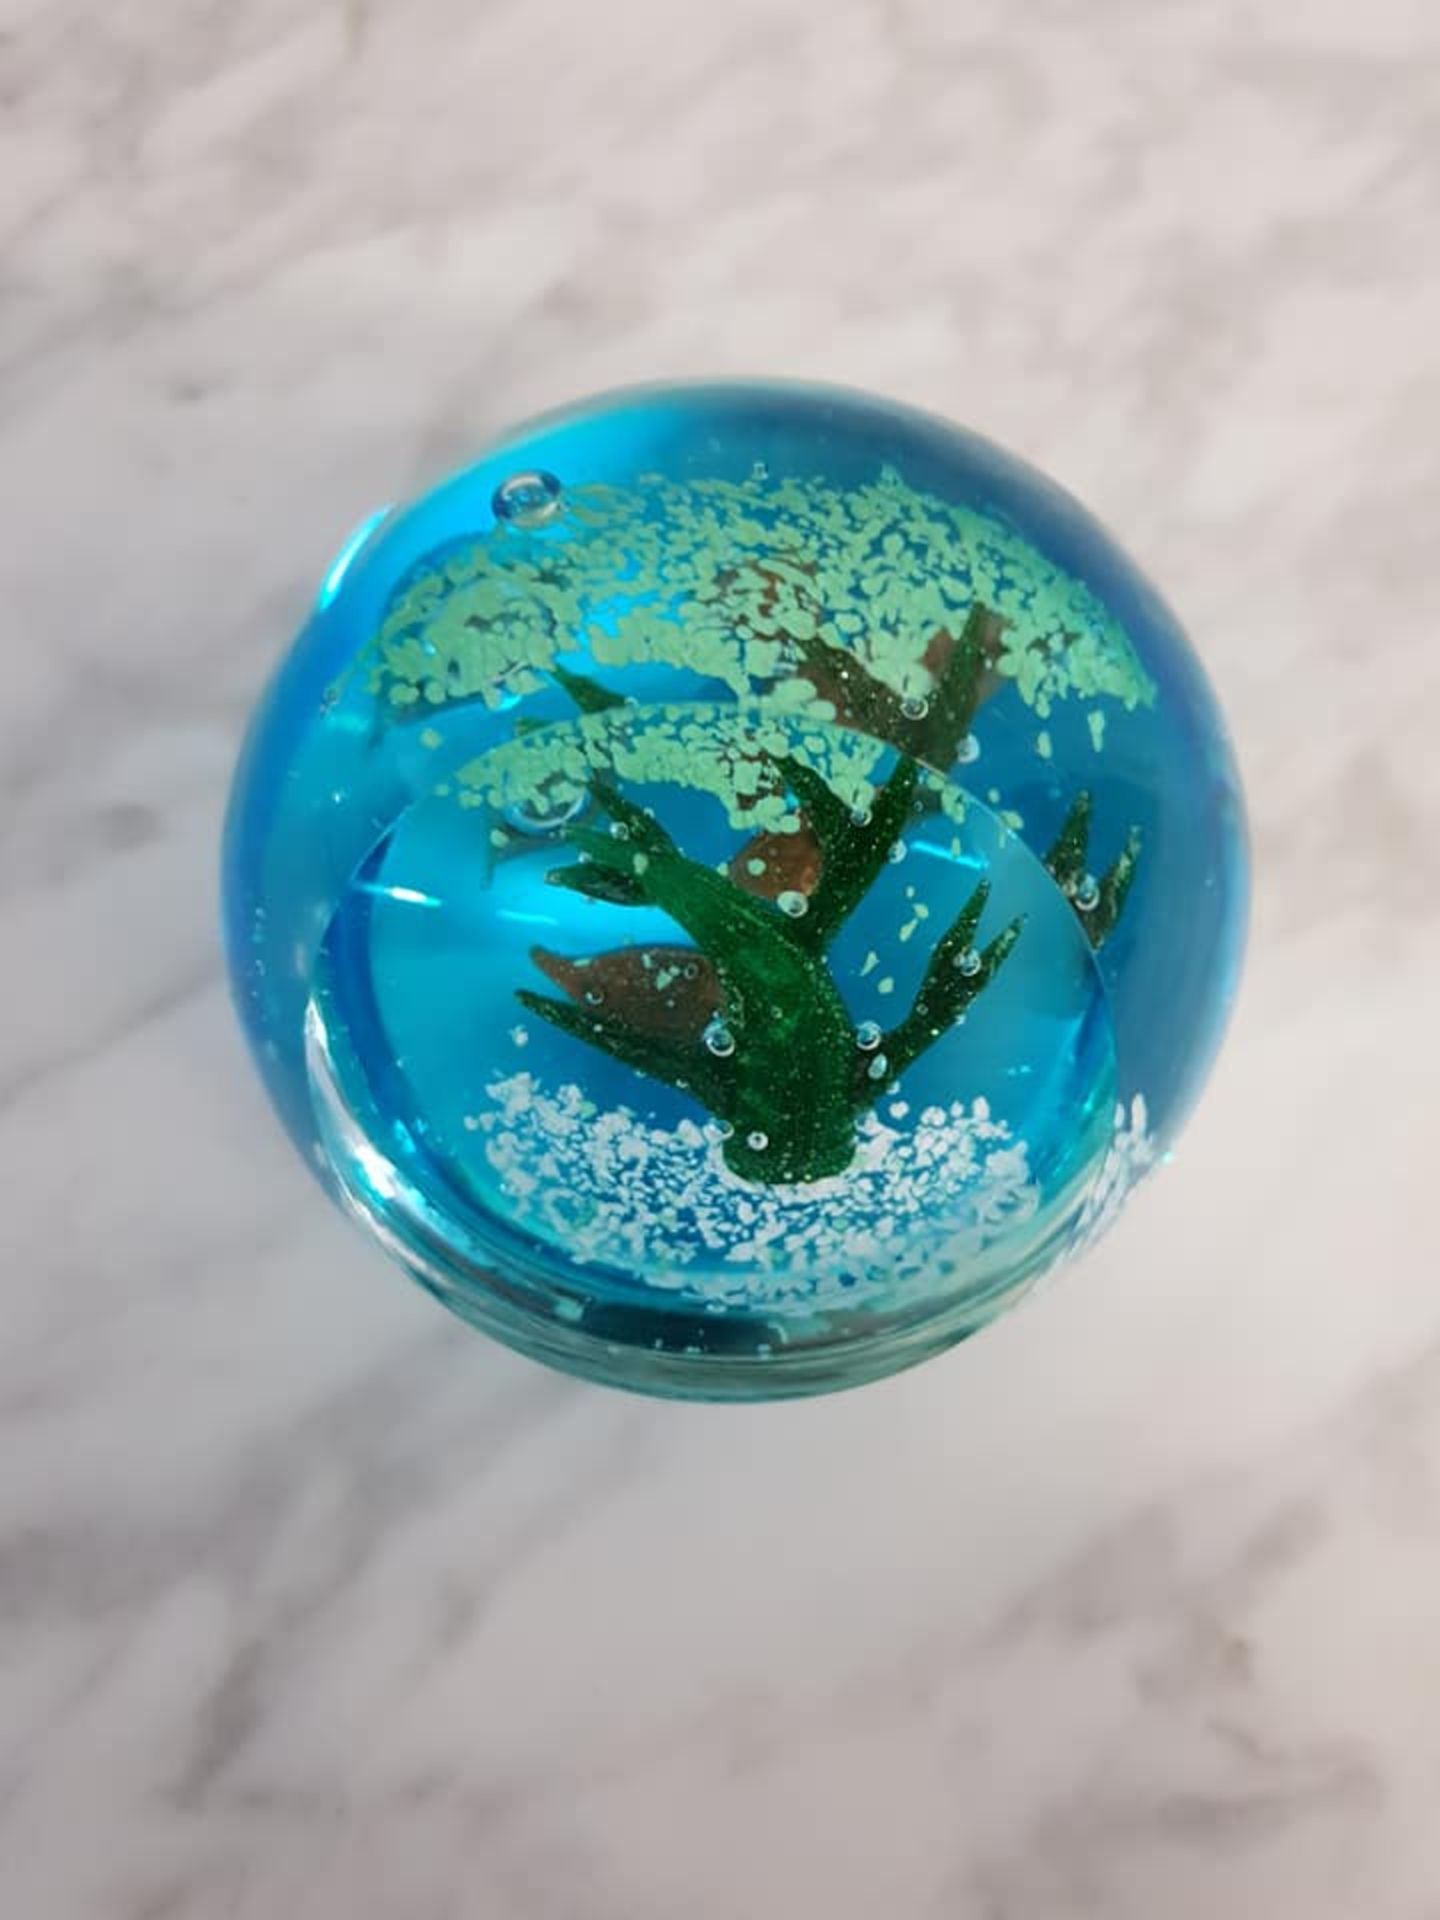 Bohemian blown art glass sphere paperweight 9cm light blu egreen and white with sea plant design - Image 2 of 2